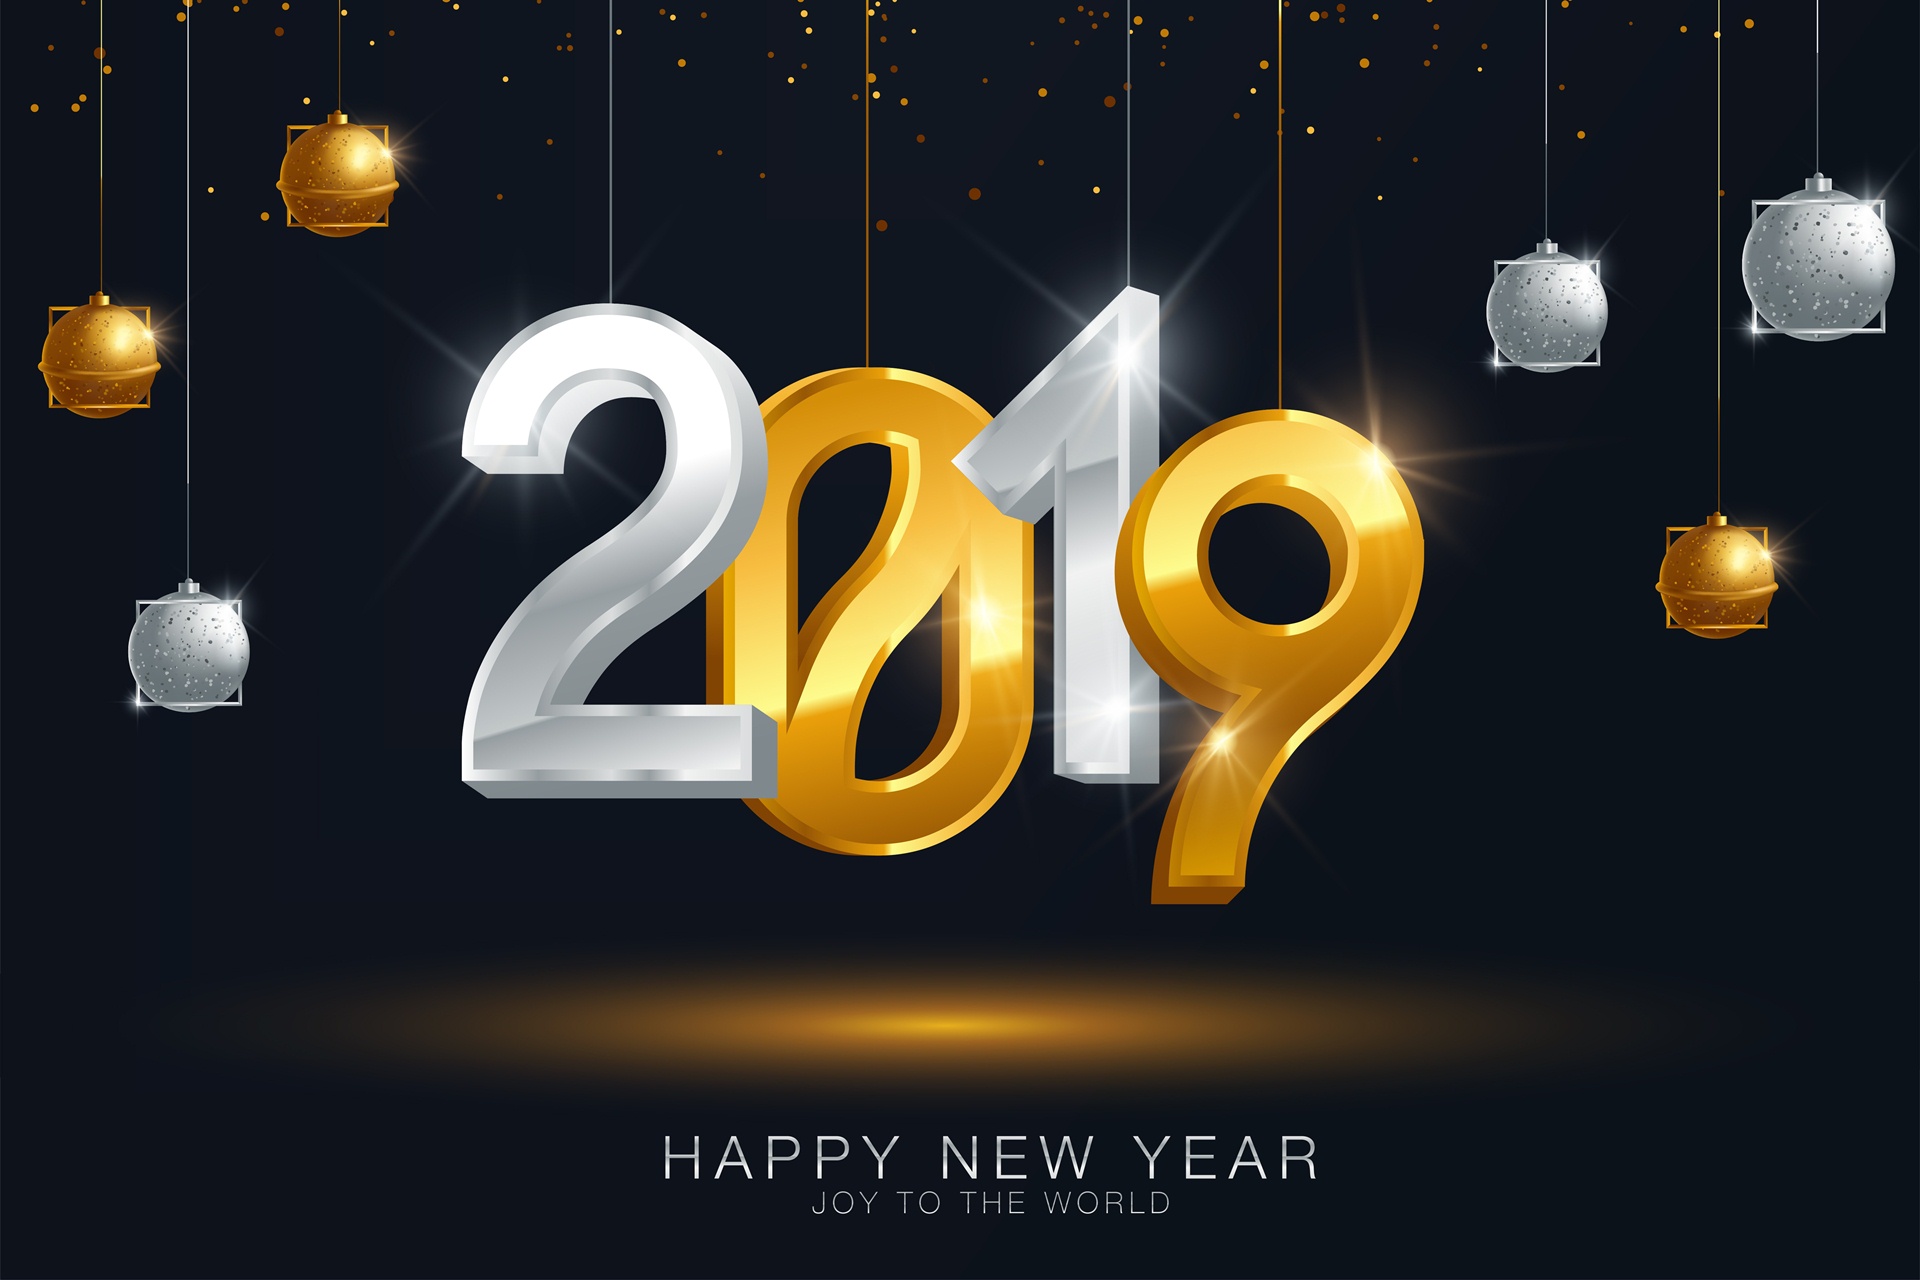 Wallpaper Picture Photo Happy New Year 2019 With Champagne